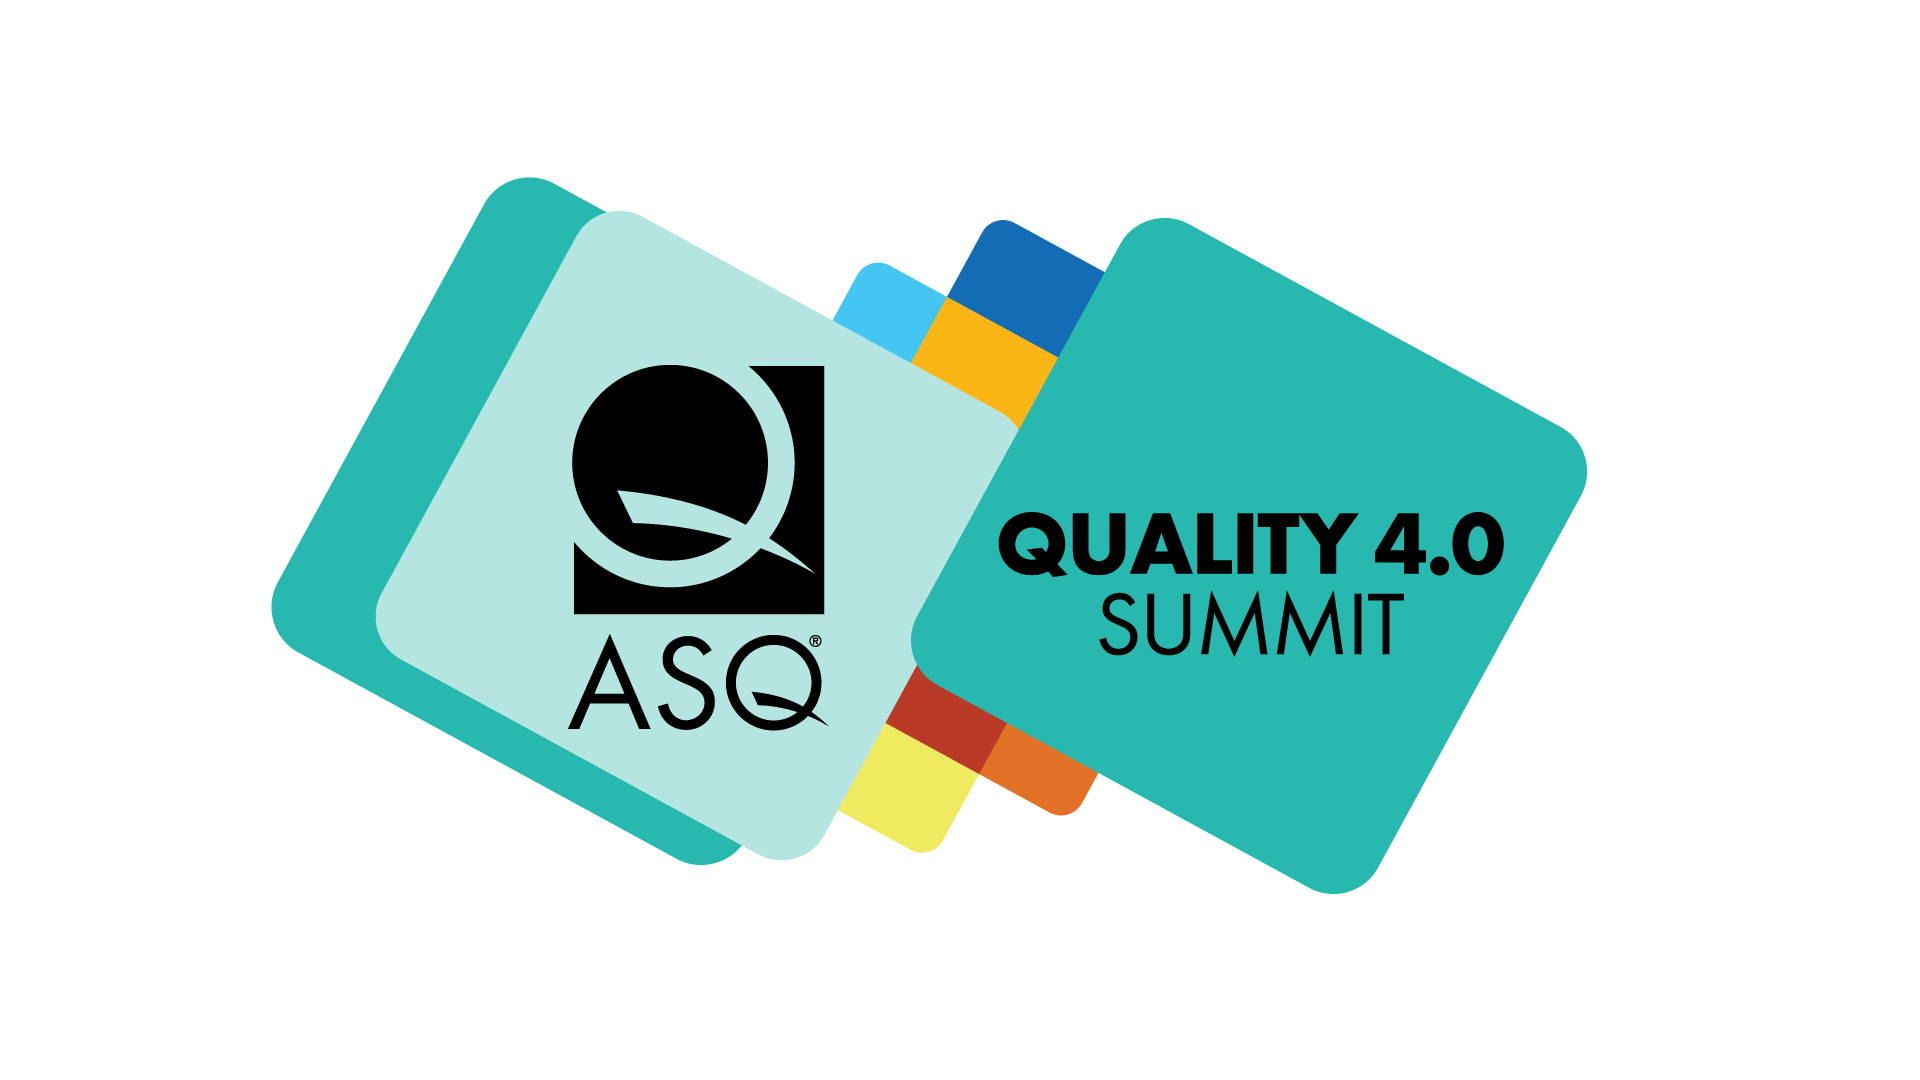 Quality 4.0 Summit Early Bird Registration Extended to Sept 8 3305